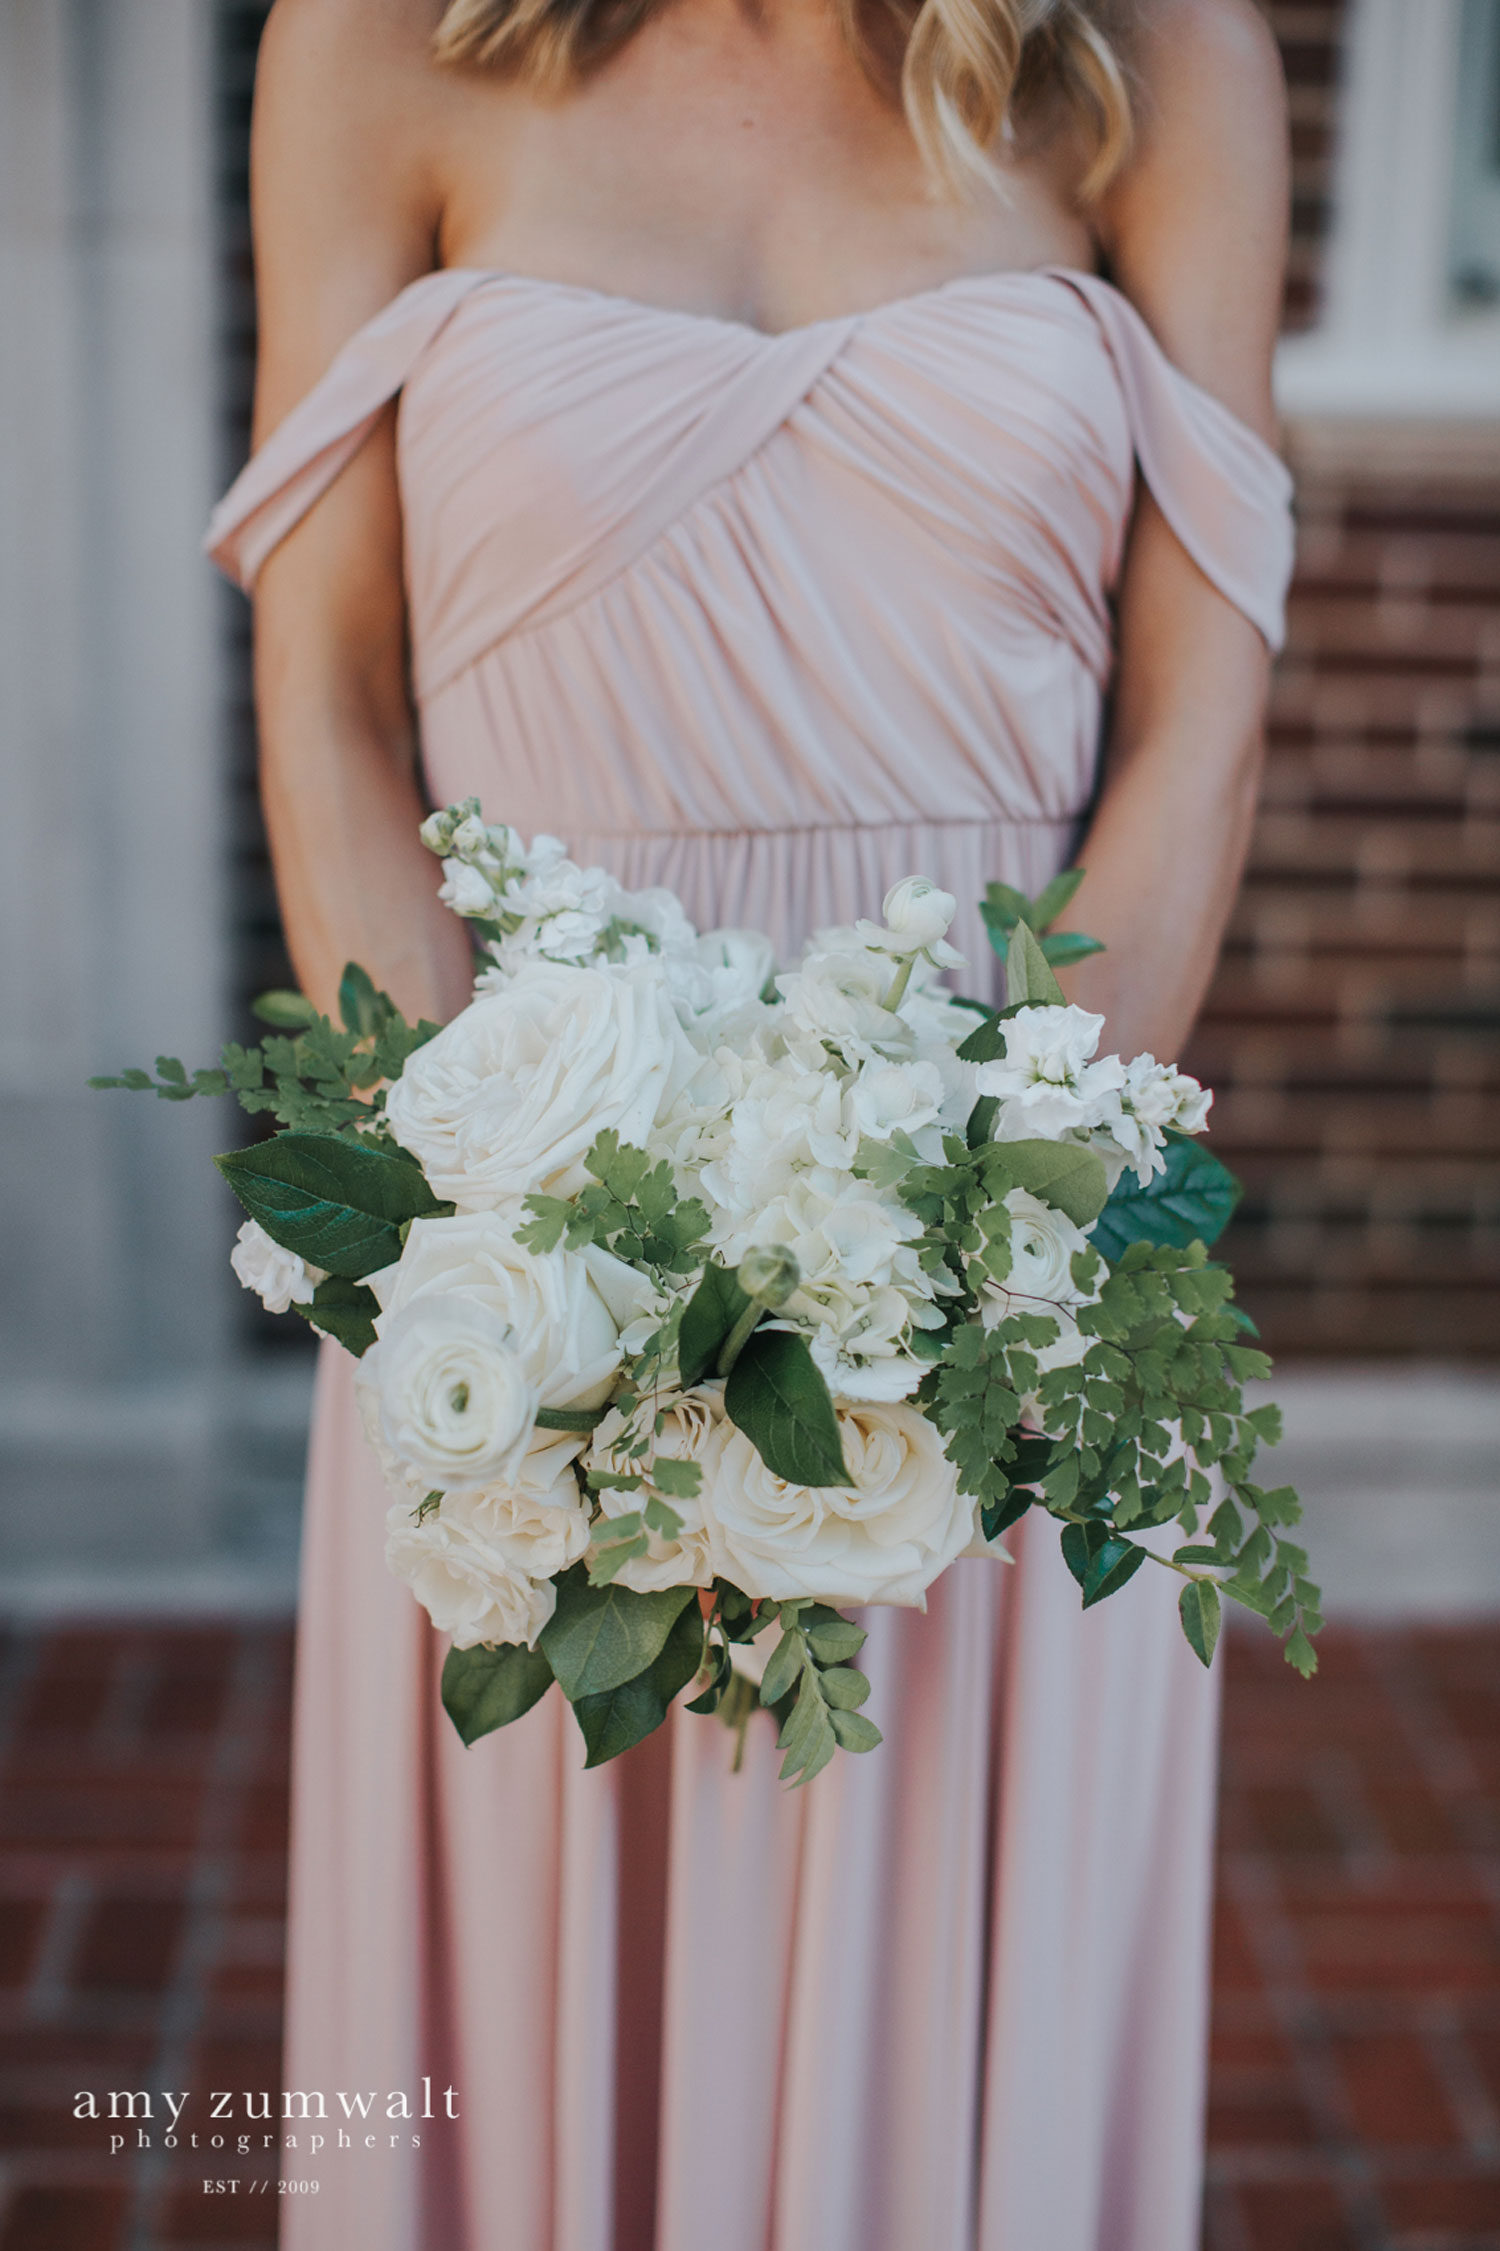 Bridesmaid in mauve bridesmaid dress holding a white and green bouquet